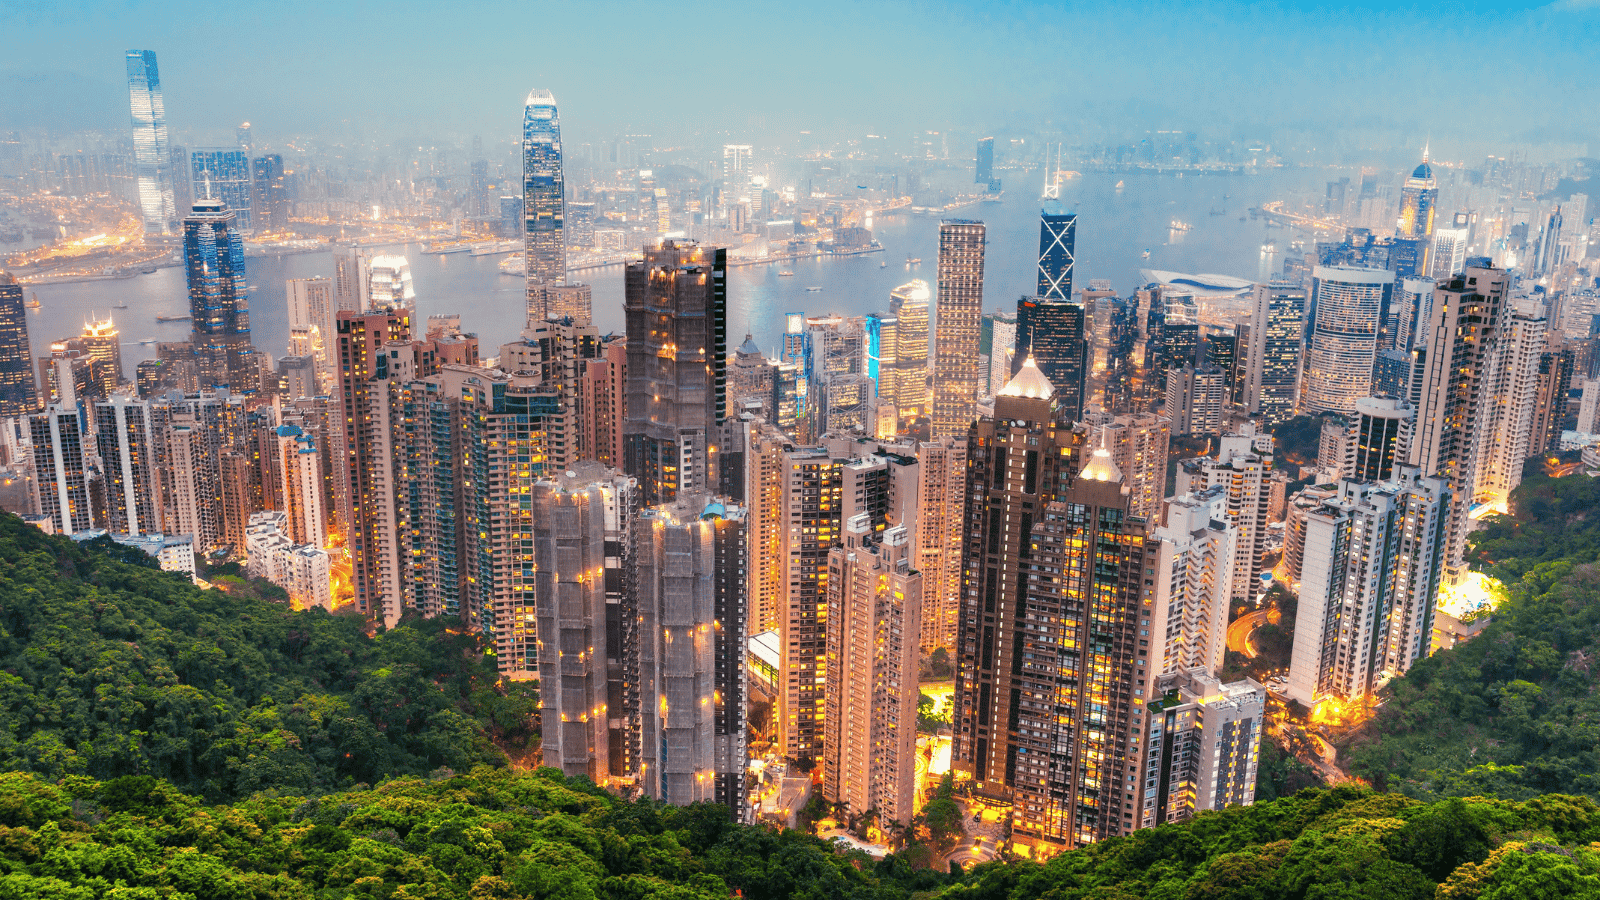 <p>The bustling metropolis of Hong Kong, a Chinese administrative region, is an excellent Dubai alternative. Both have towering skyscrapers, luxury shops, and a vibrant cultural scene.</p><p>Hong Kong combines old-world charm with modern innovation. Around every street corner, you’ll find ancient temples, mouthwatering cuisine, and exciting nightlife spots.</p>